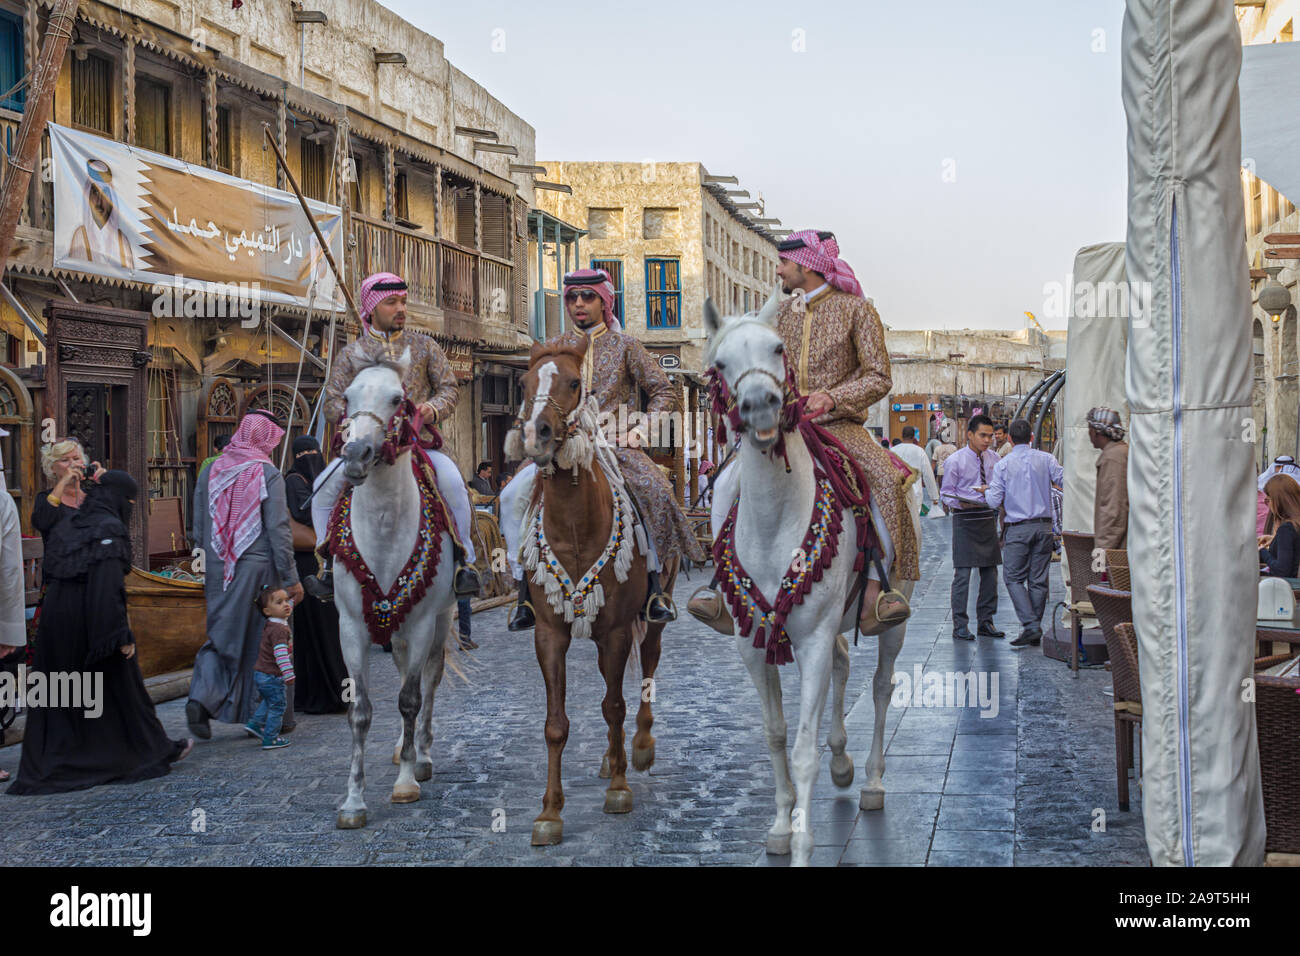 Doha-Qatar, January 24,2013: Souk Waqif in Doha Qatar main street day light view with traditional guards riding horses and people walking Stock Photo